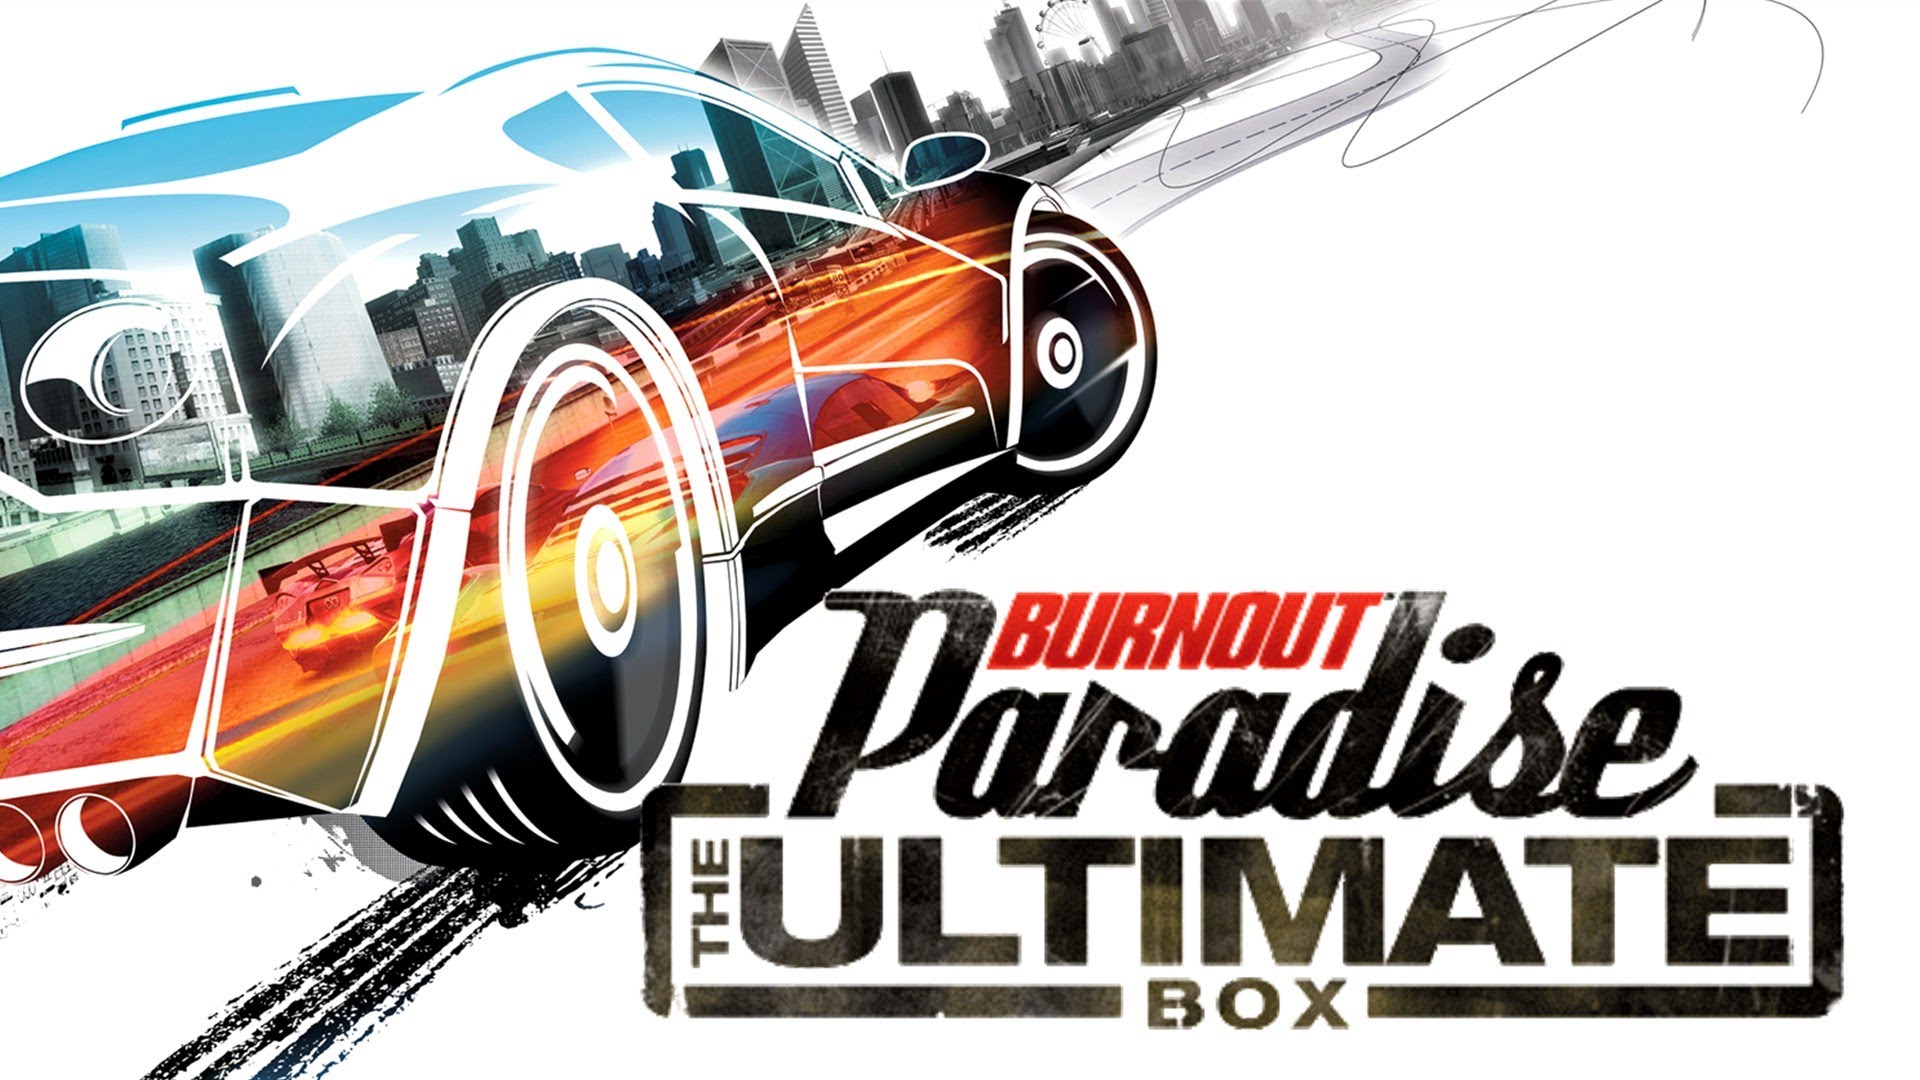 Burnout Paradise The Ultimate Box PC Download Game For Free,